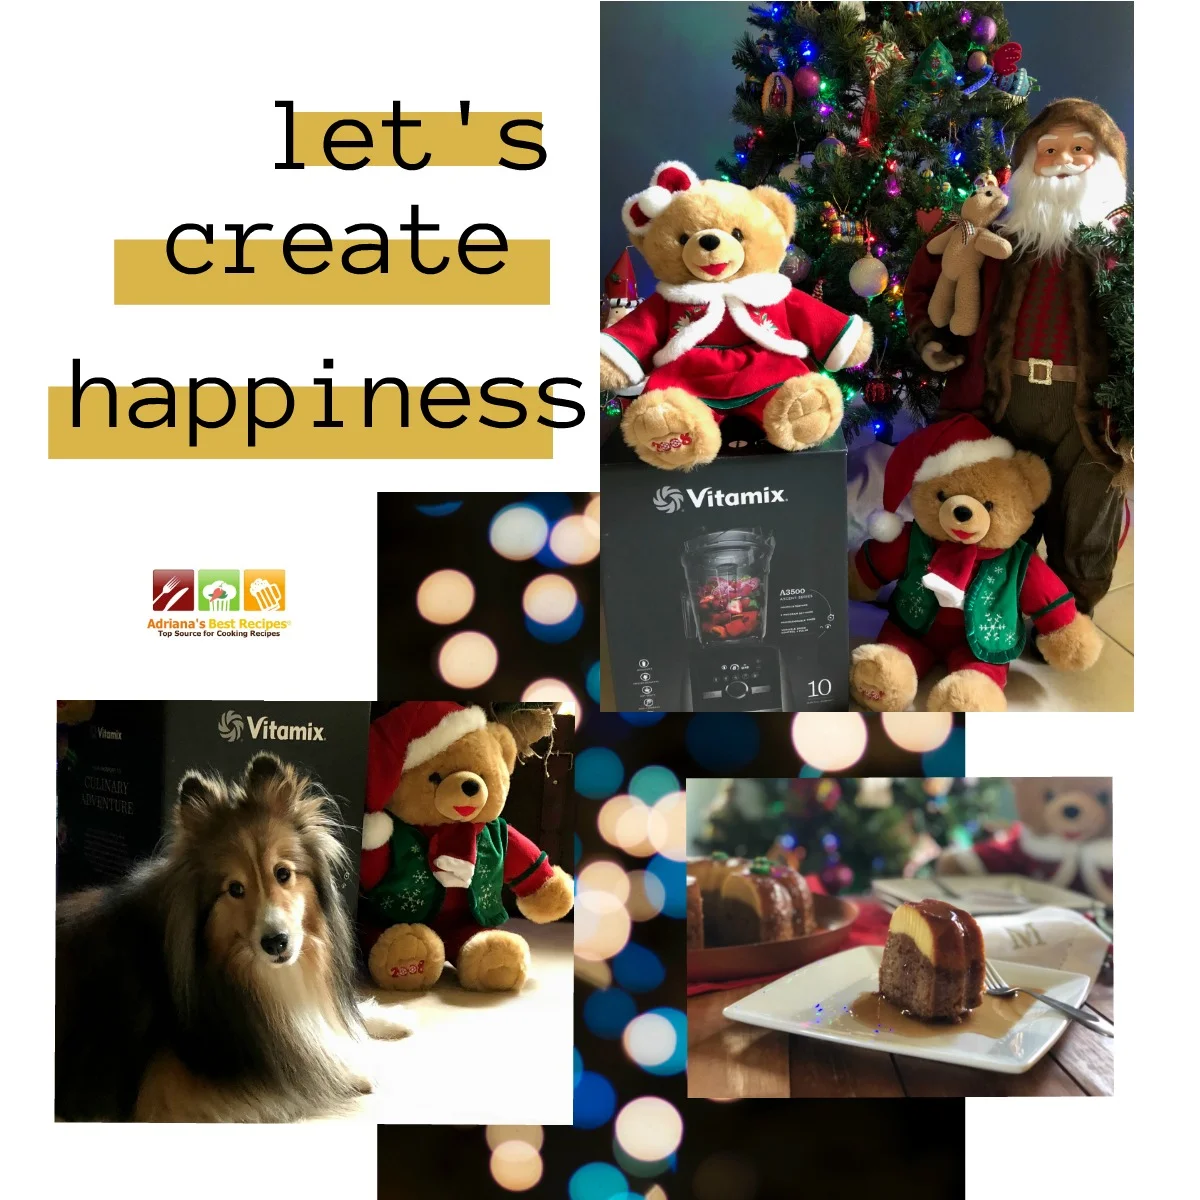 This holiday season let's create happiness that will last year round